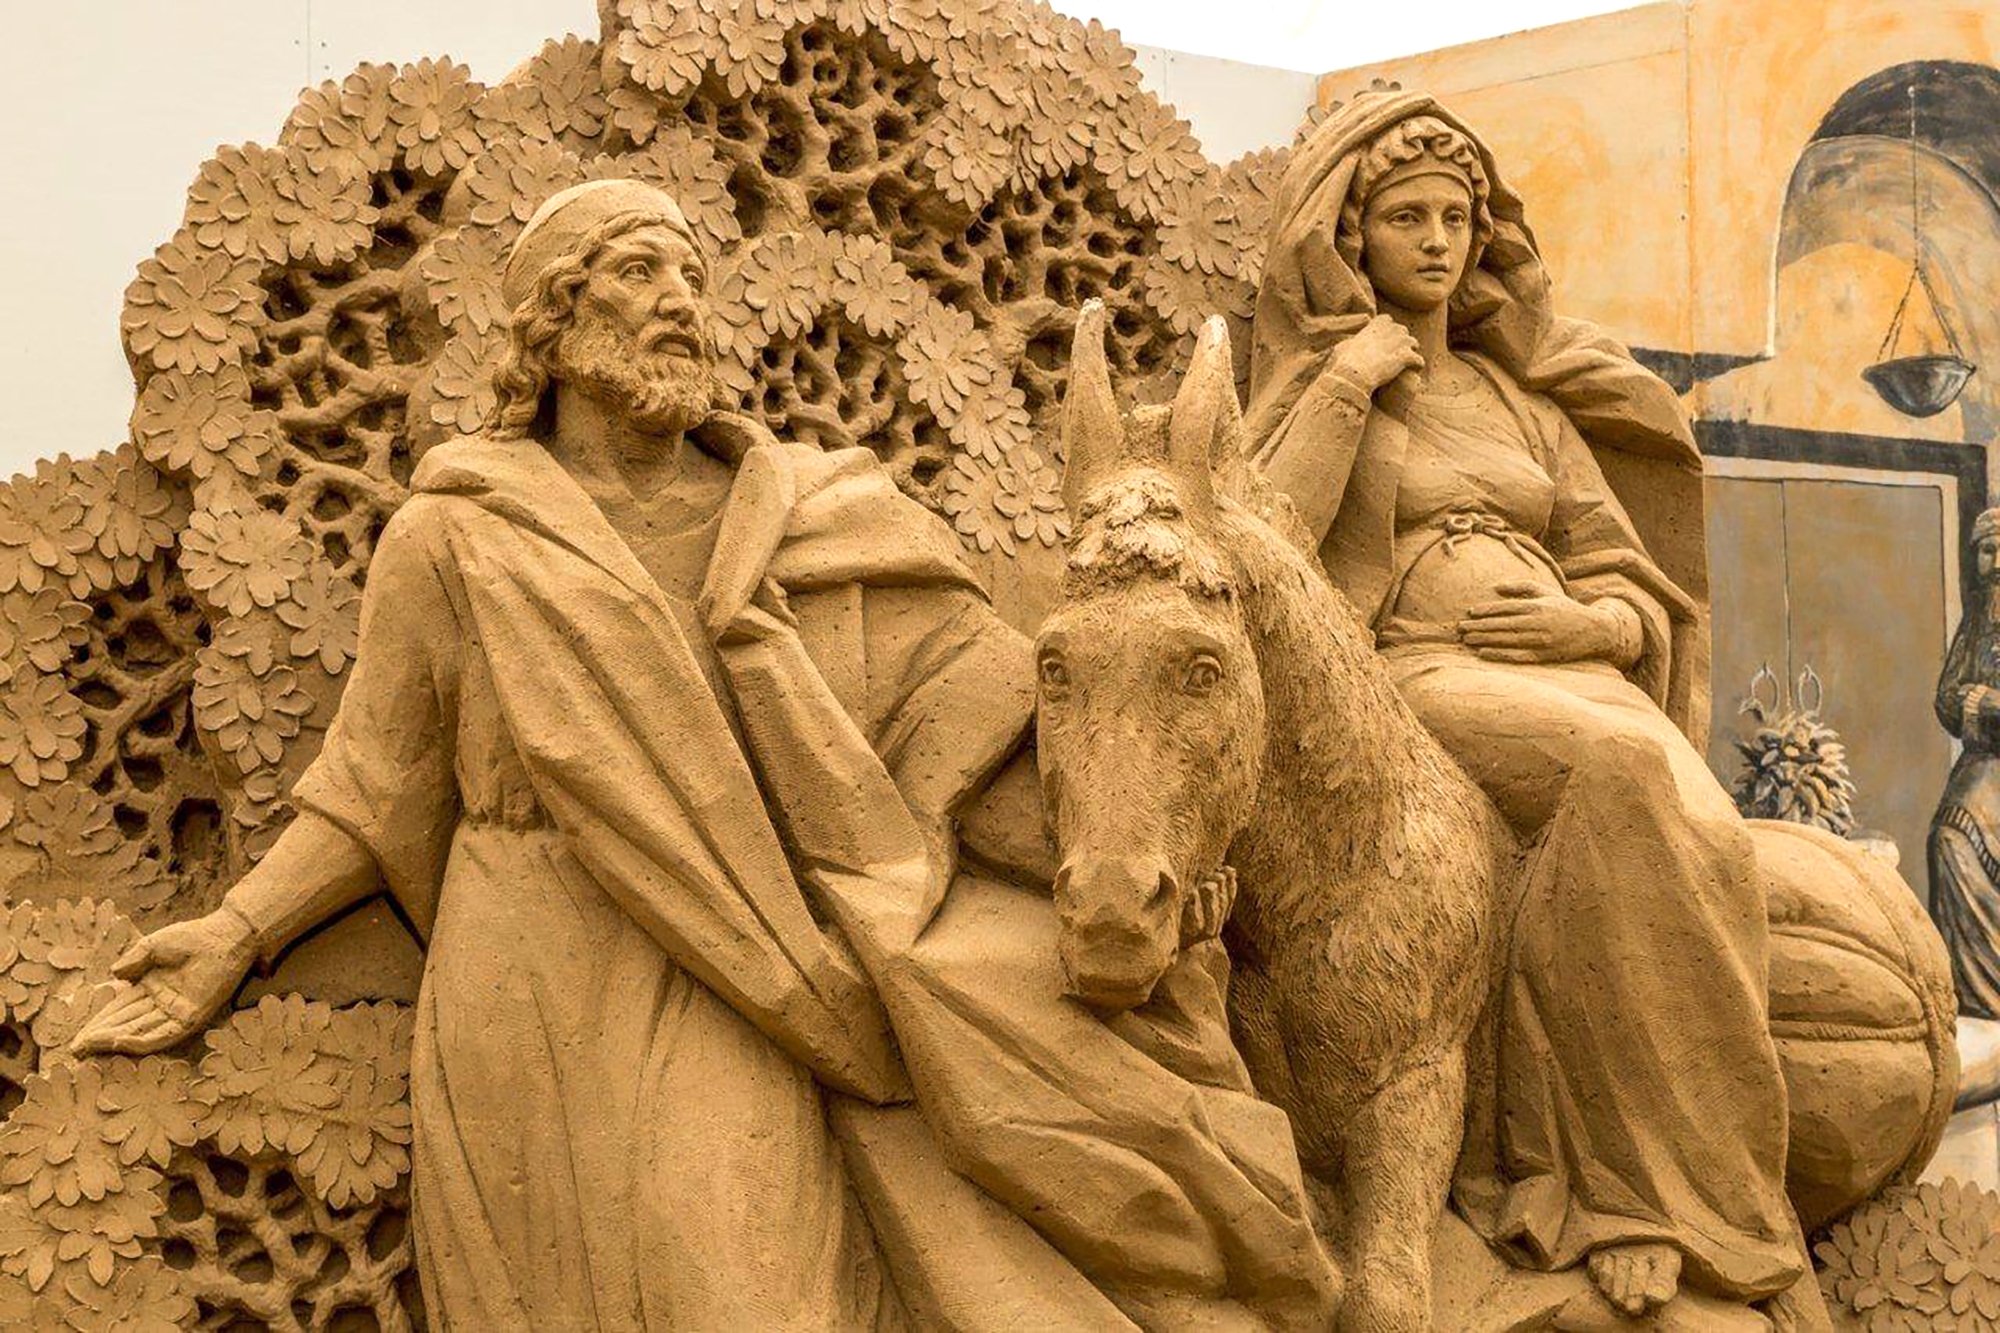 'Sand Nativity' scene to display in St. Peter's Square